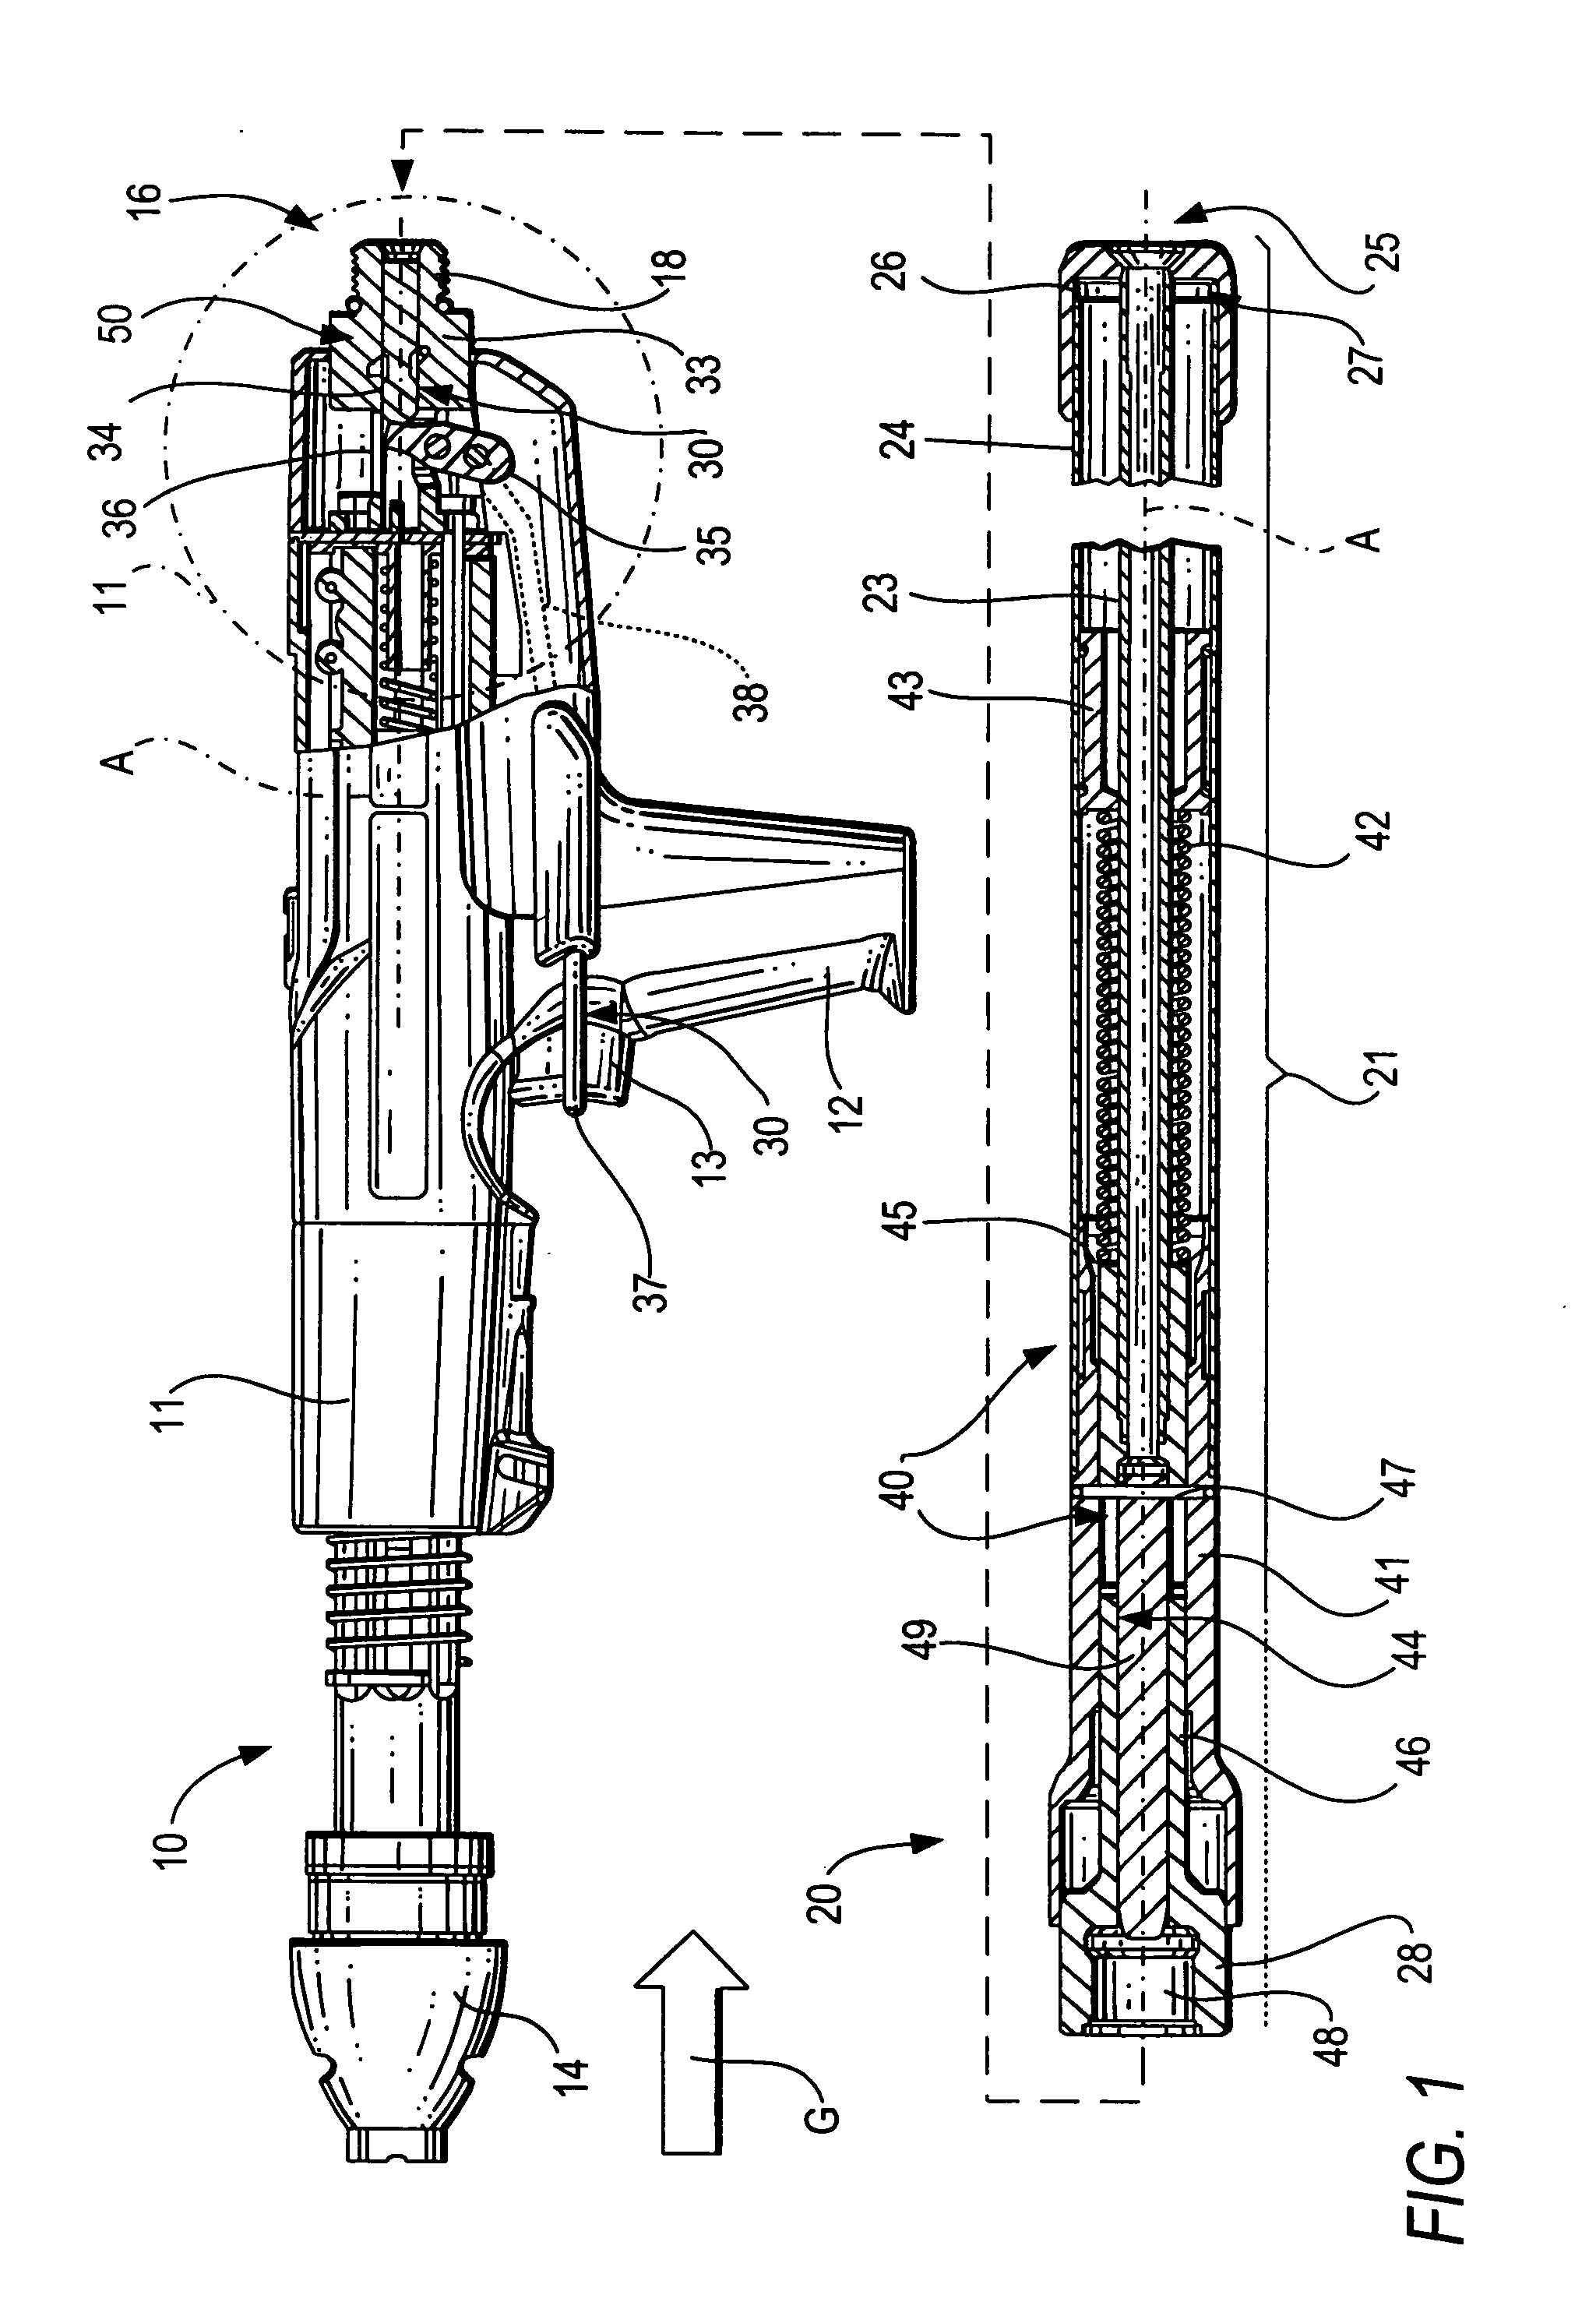 Hand-held setting tool with connection means for a positioning device